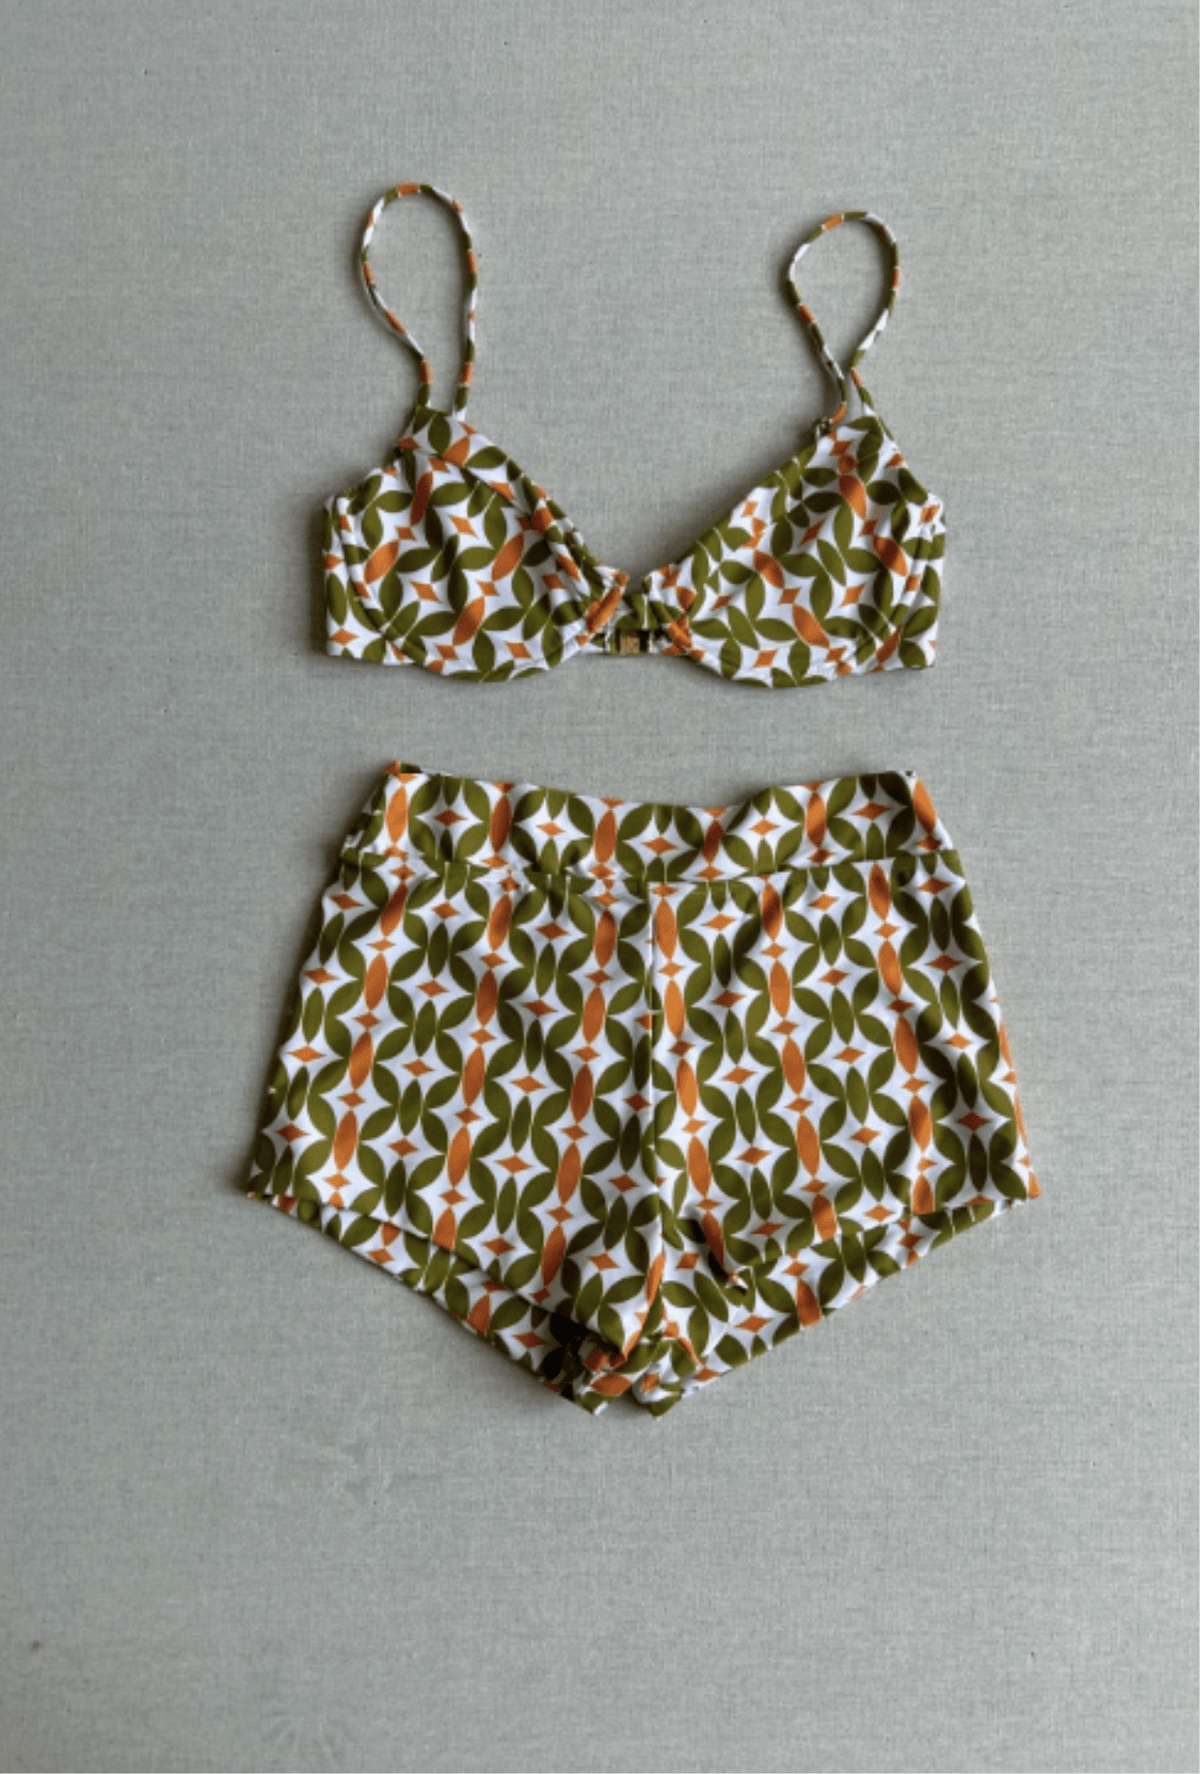 The Lulu Top + Sutton Short in Avocado Mod (Size Large)